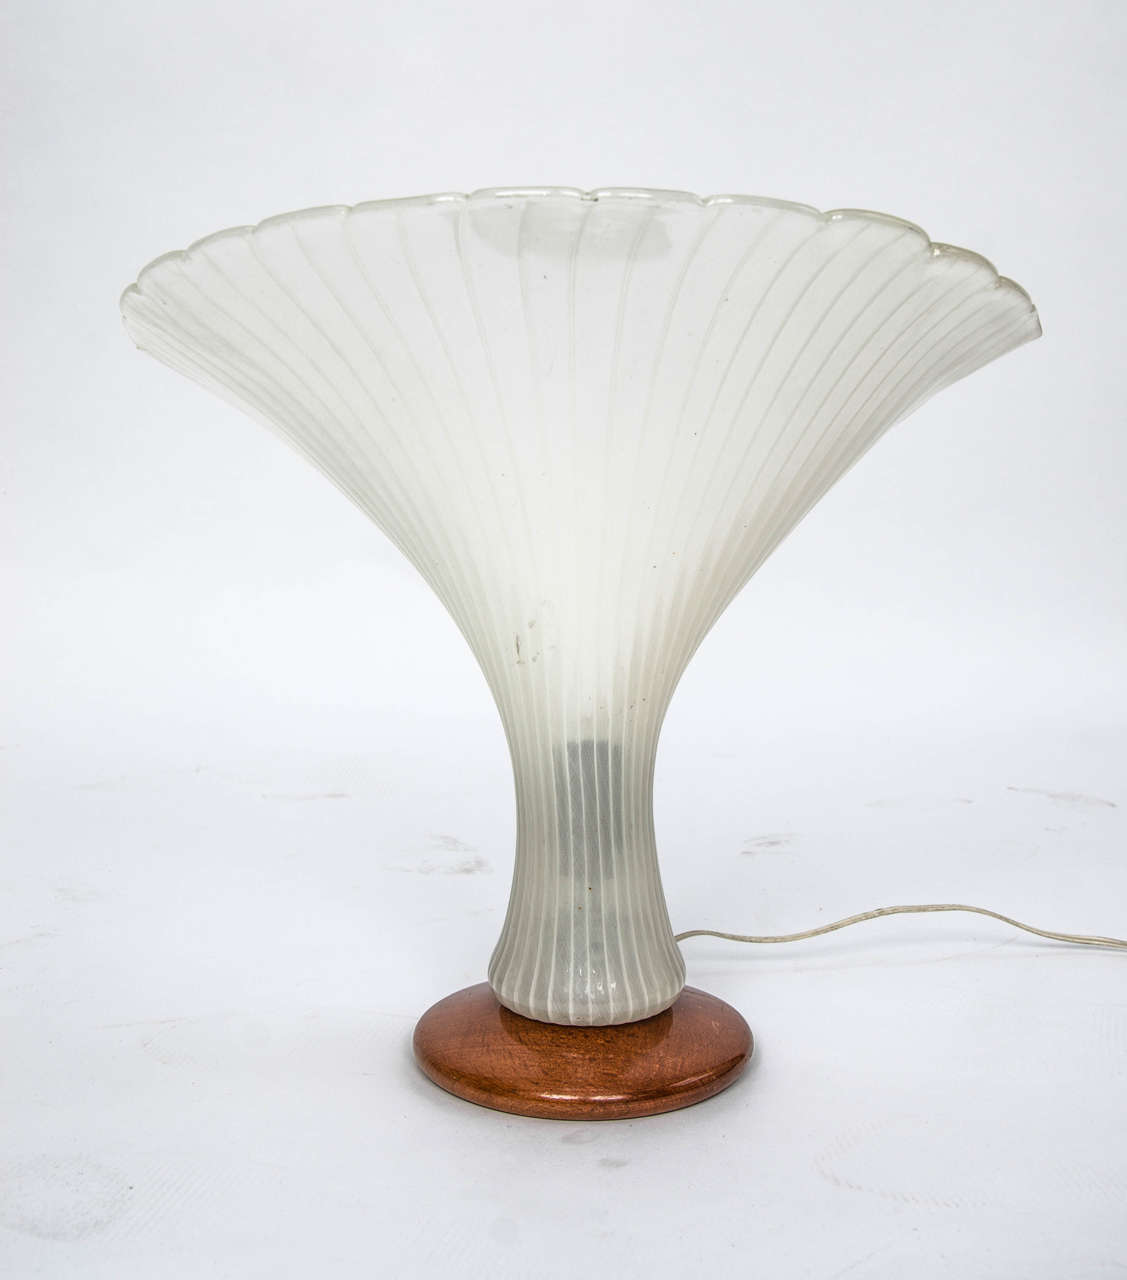 A fan-shaped glass light of Italian Murano glass, attributed to Venini, with delicate zanfirico/merletto patterns, on a wooden base, mid-20th century. 

The lamp is in very good original condition with one small chip on the reverse edge, which is